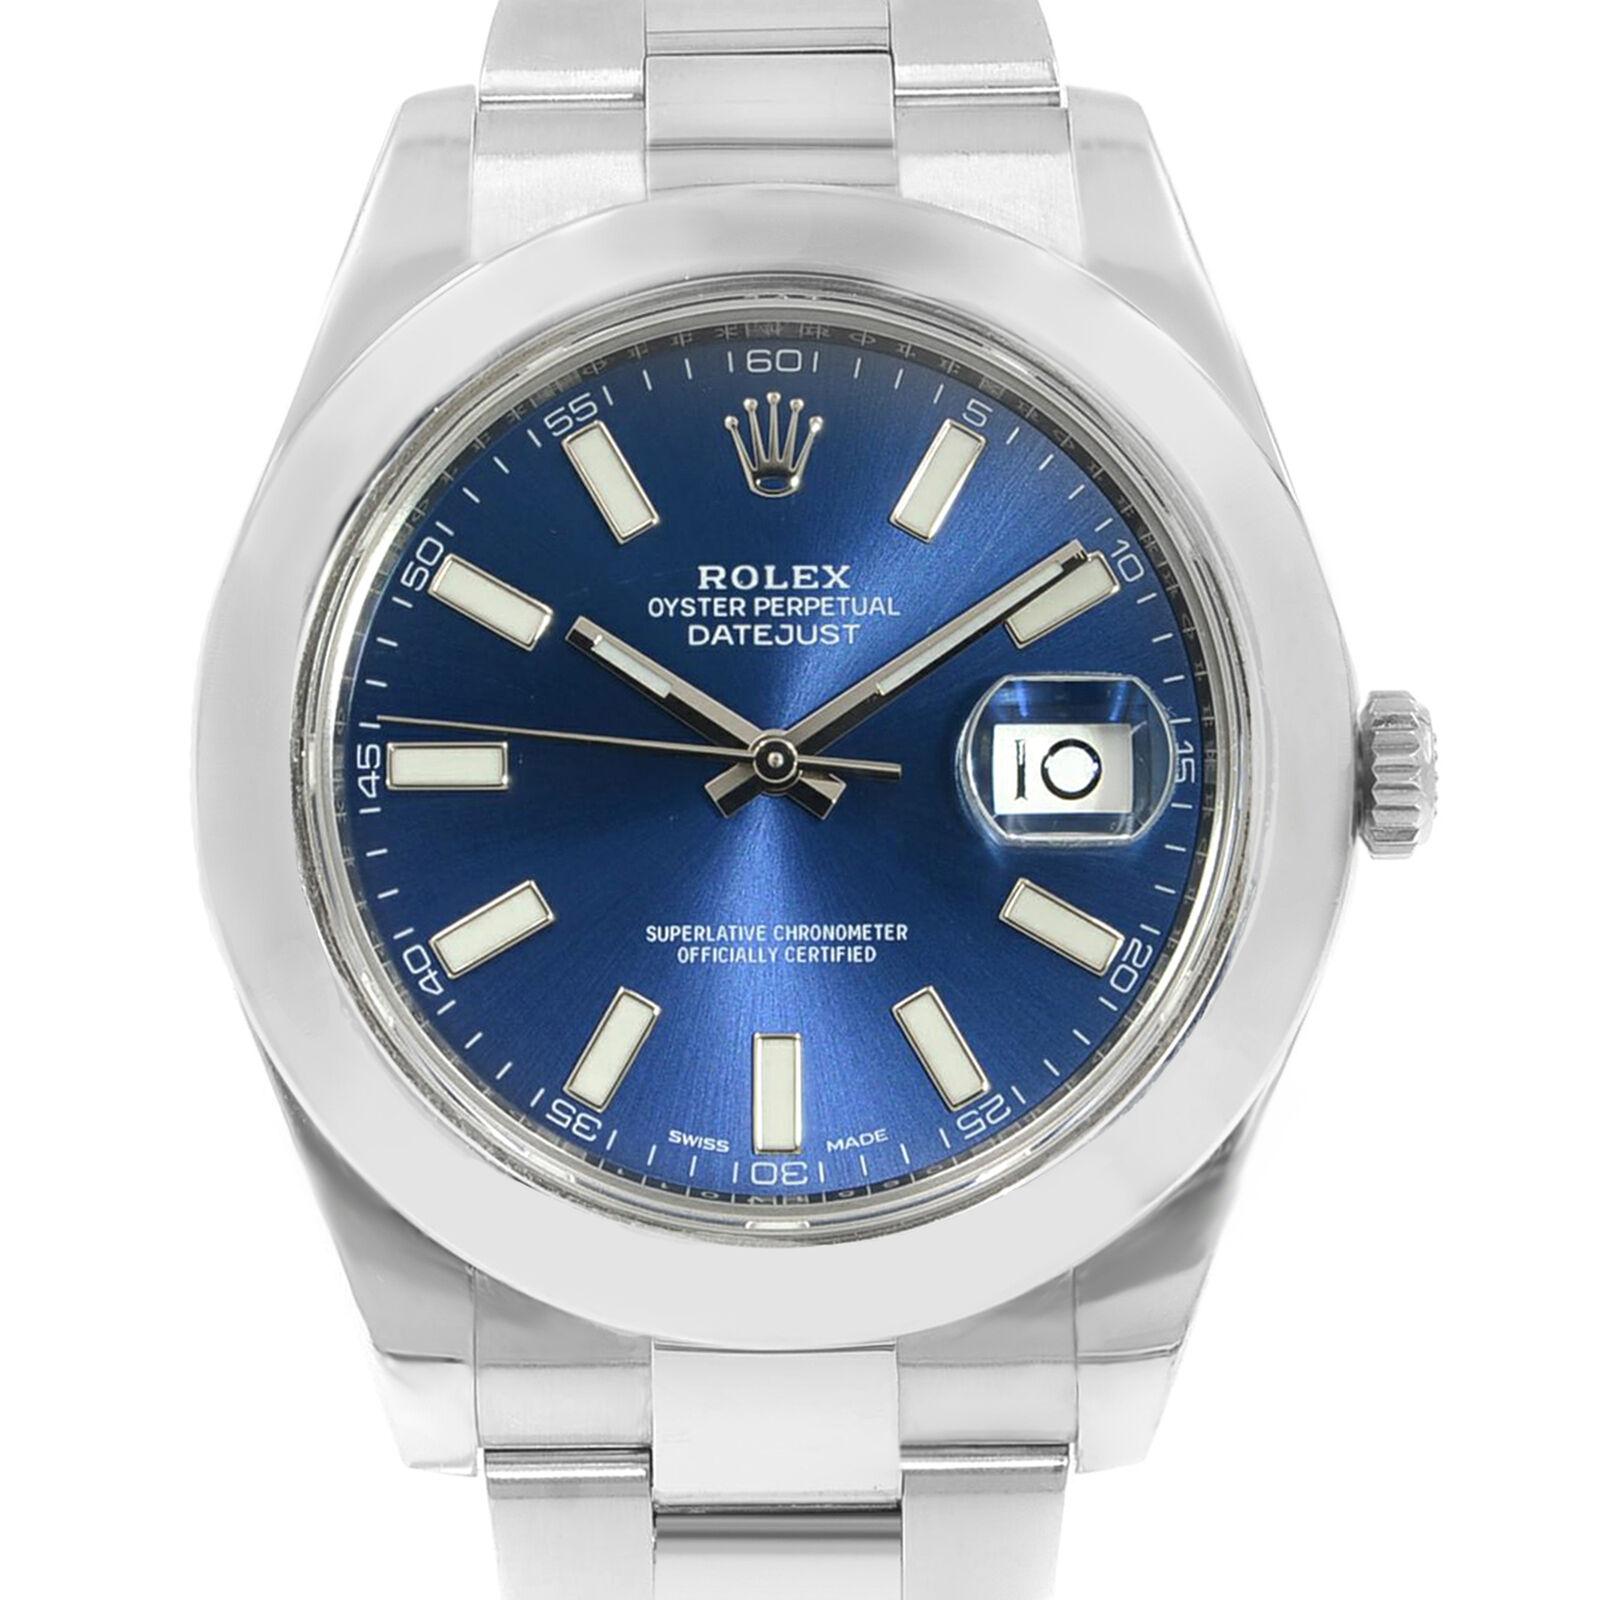 This pre-owned Rolex Datejust II 116300 is a beautiful men's timepiece that is powered by an automatic movement which is cased in a stainless steel case. It has a round shape face, date dial and has hand sticks style markers. It is completed with a